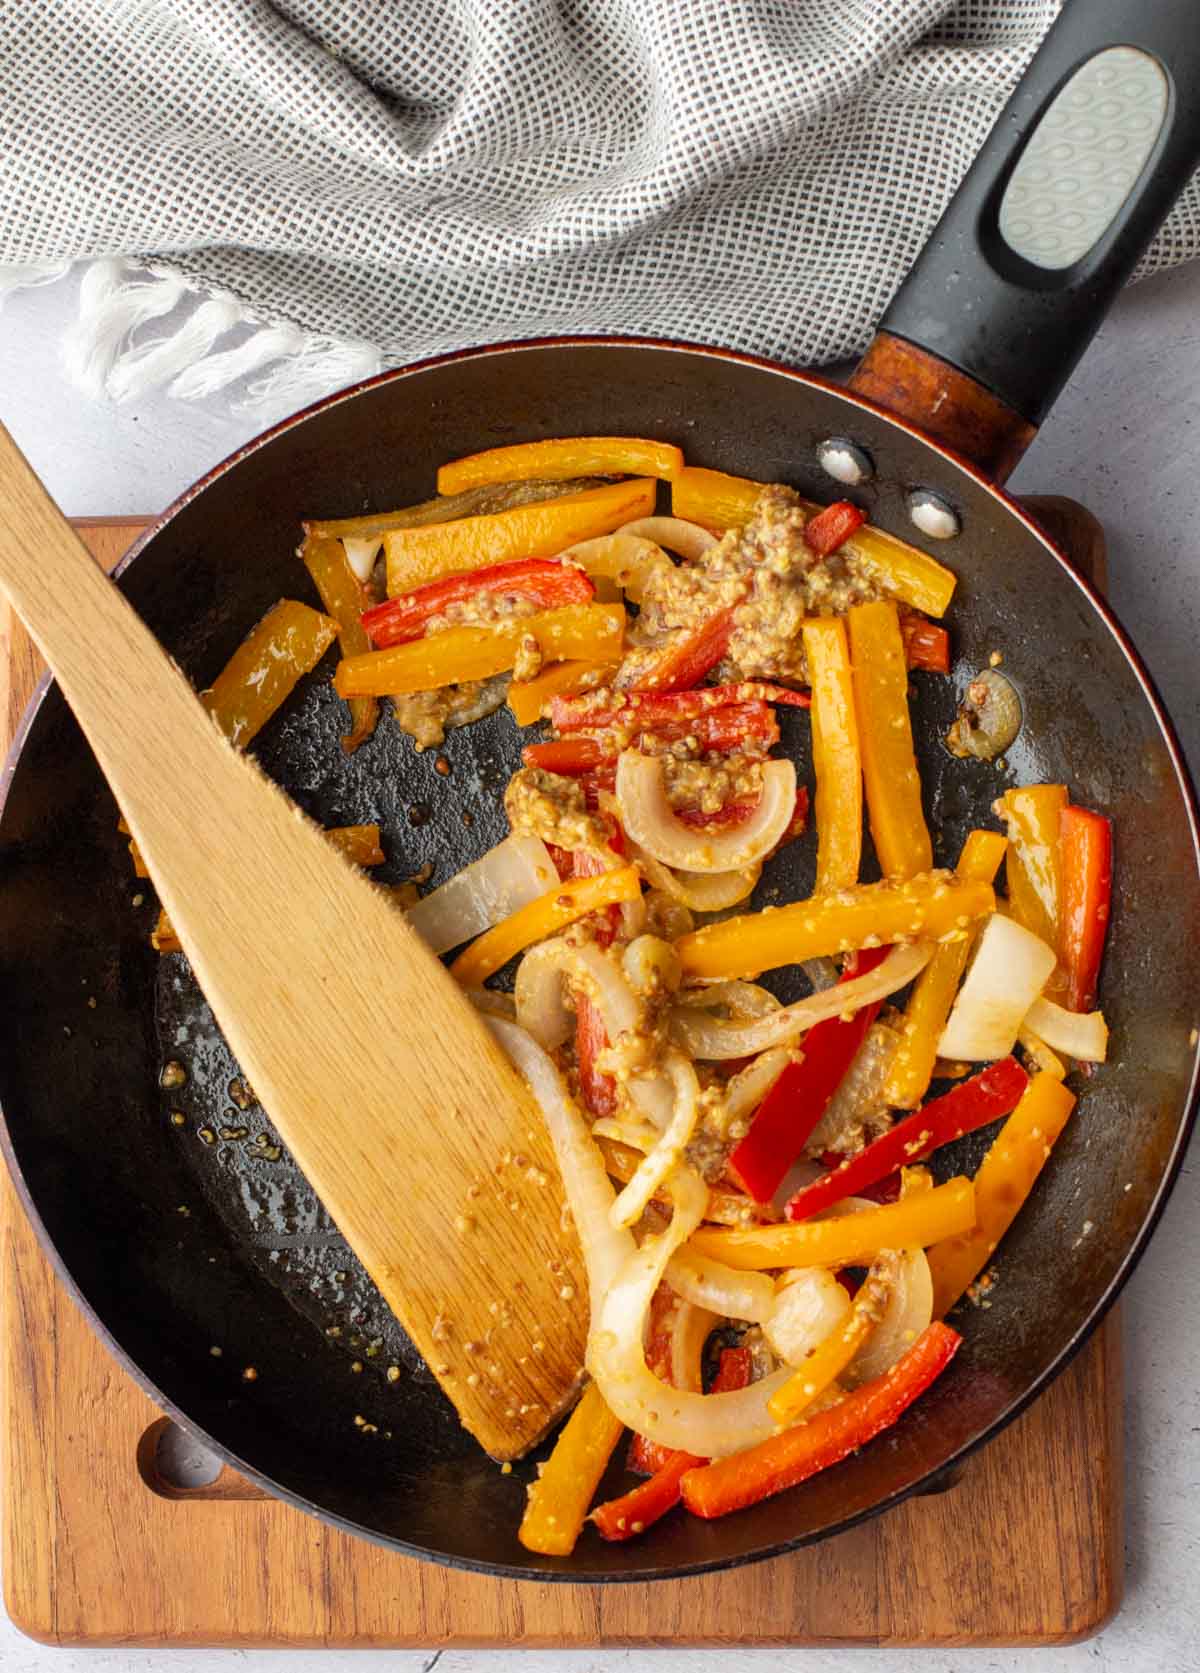 Pan fried strips of orange and red bell pepper.